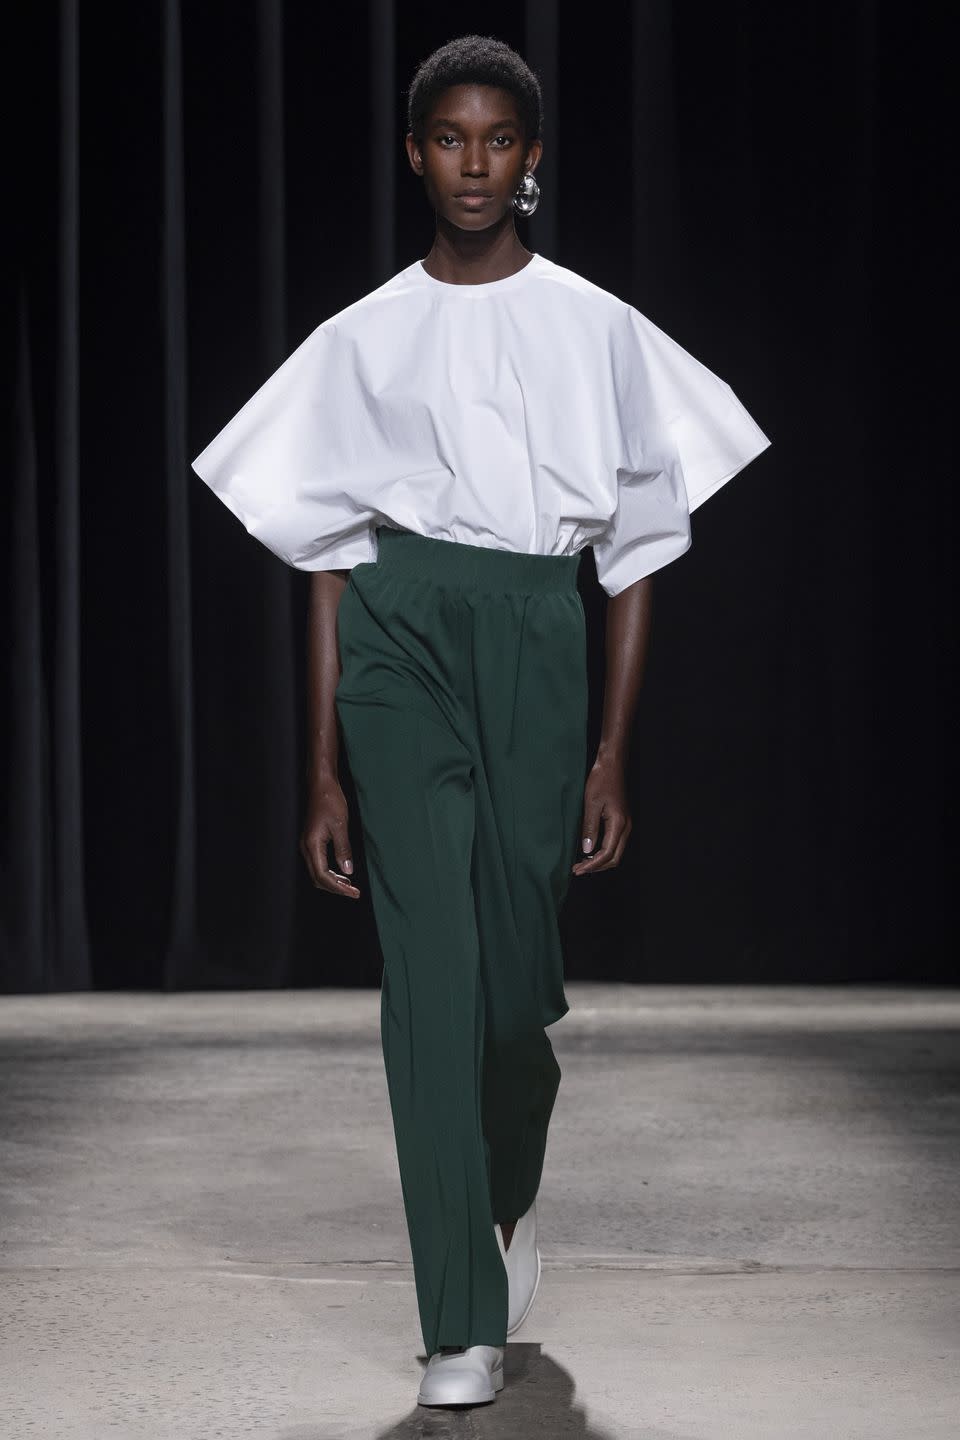 a model wearing a white shirt and green pants